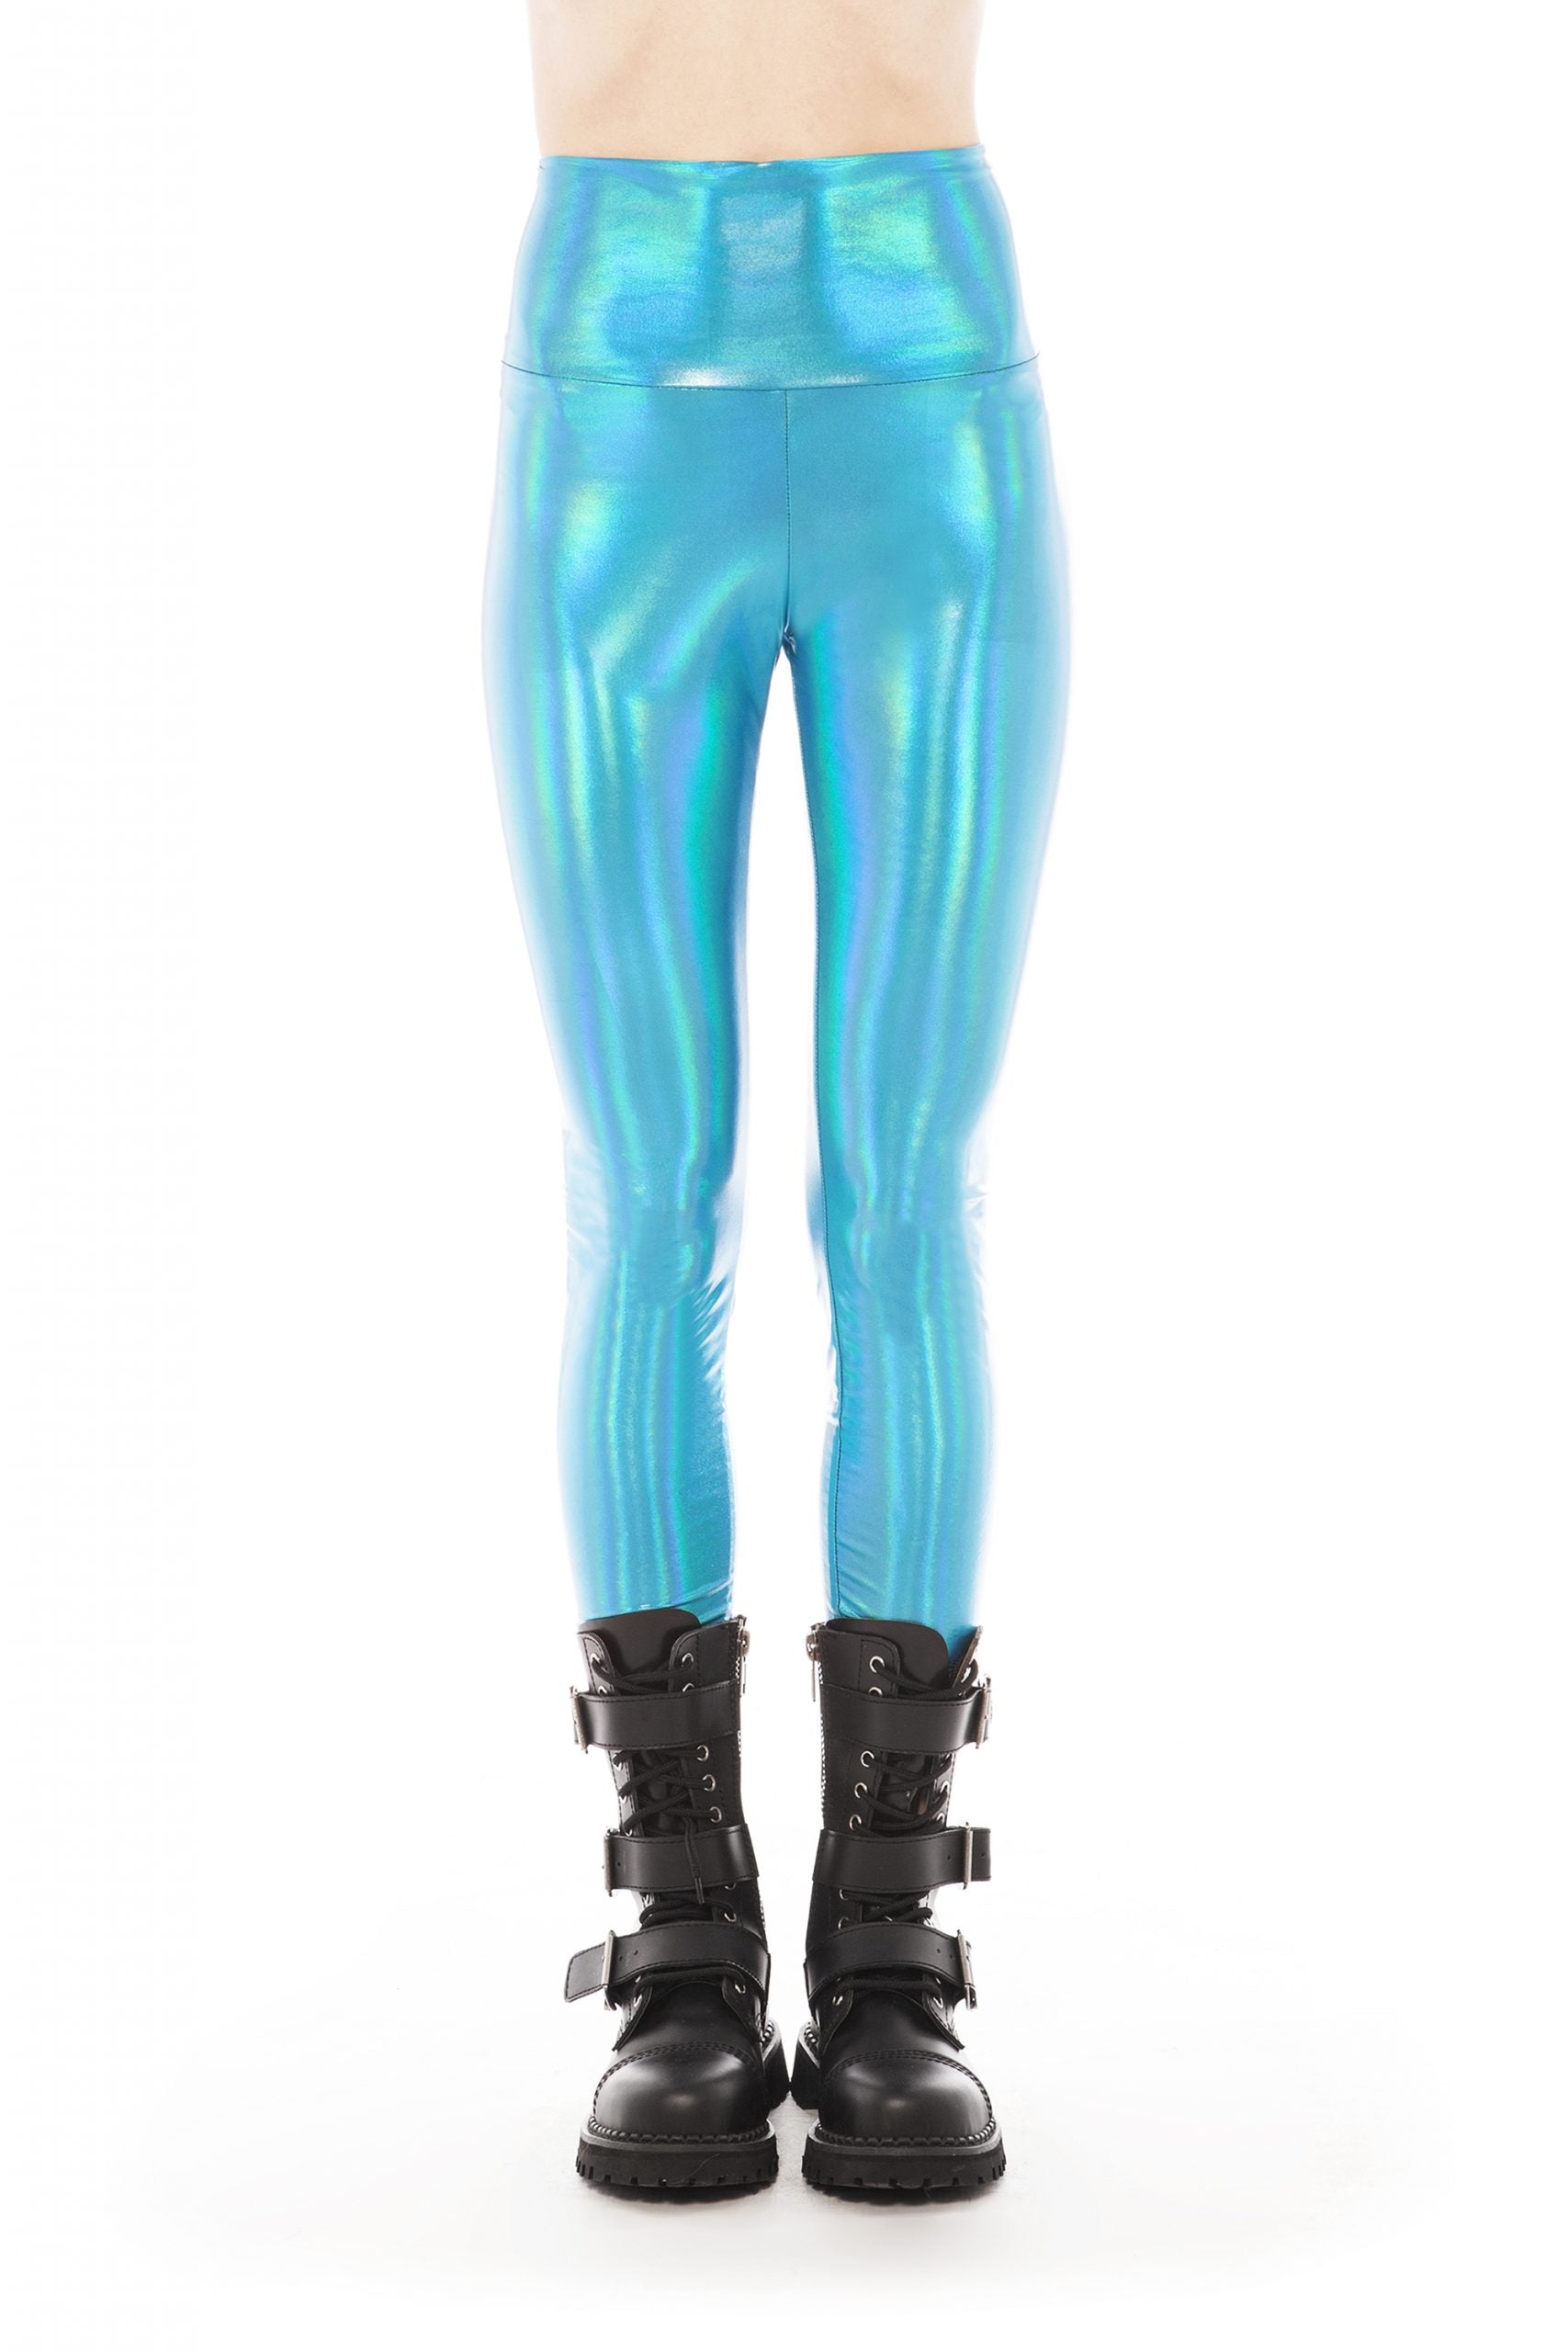 Iridescent Green Leggings by Wild Love Clothing